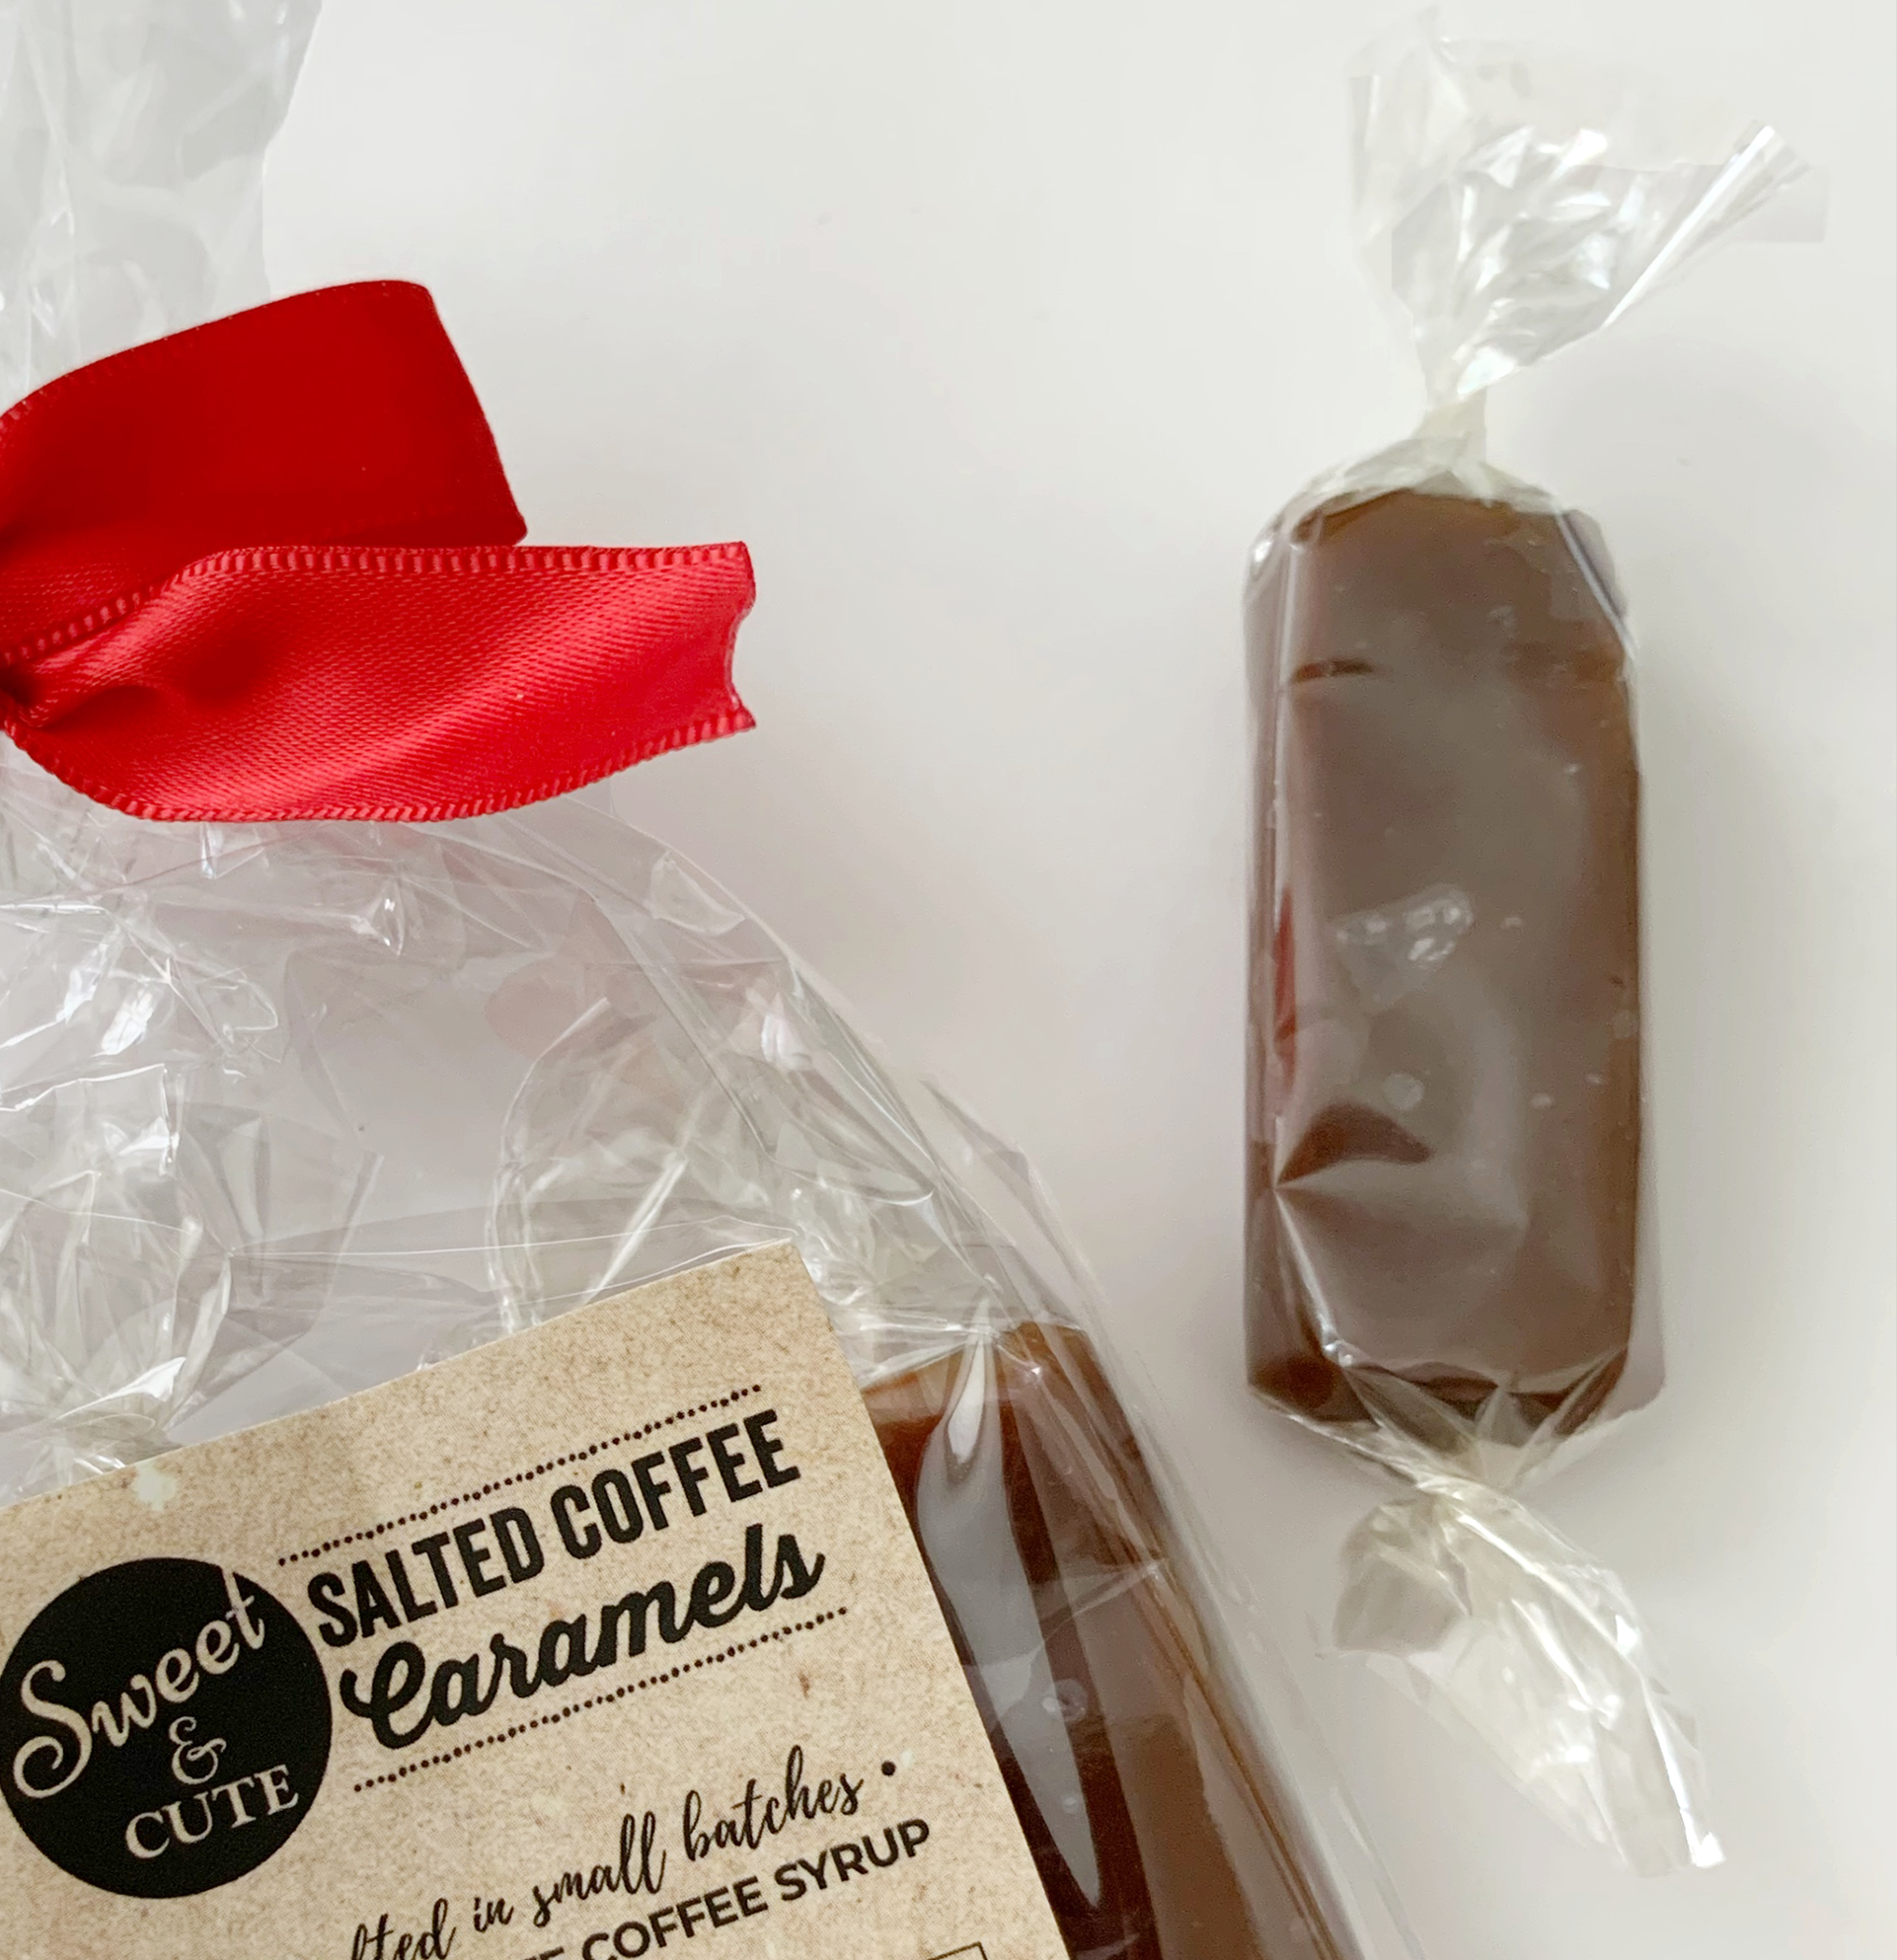 Cocoa butter sticks to mold - Pastry & Baking - eGullet Forums